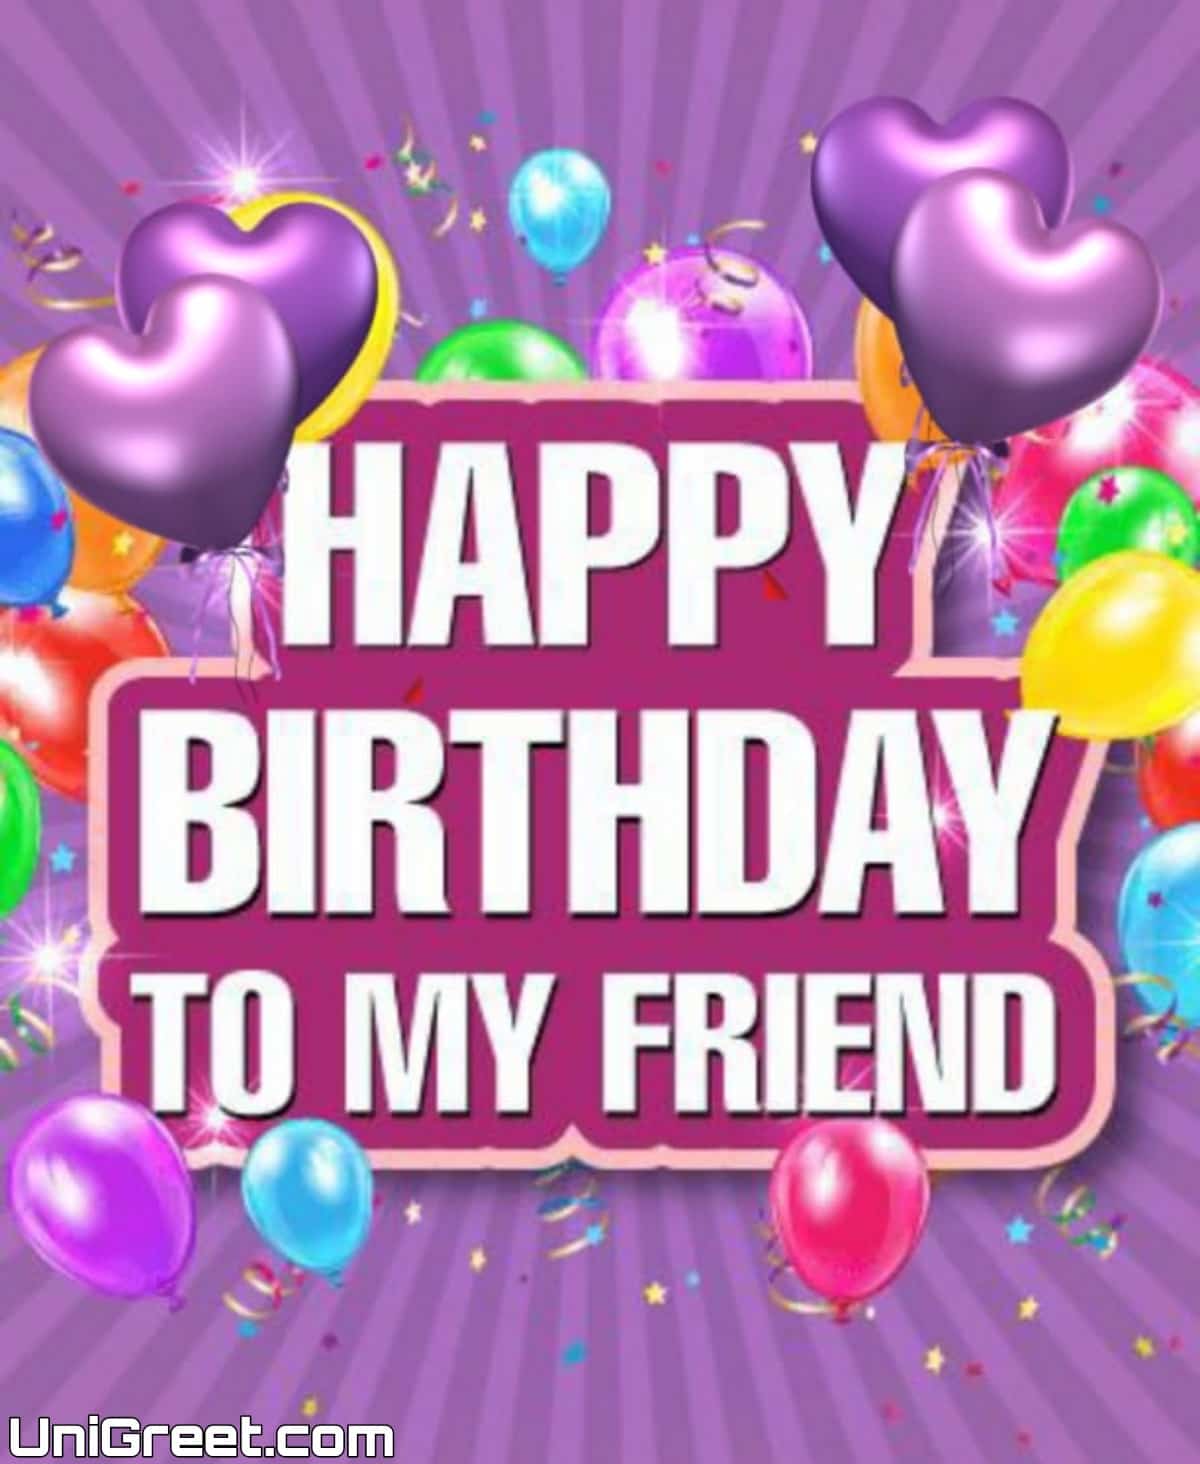 50 Beautiful Happy Birthday Friend Images, Quotes, Wishes, Hd Photos